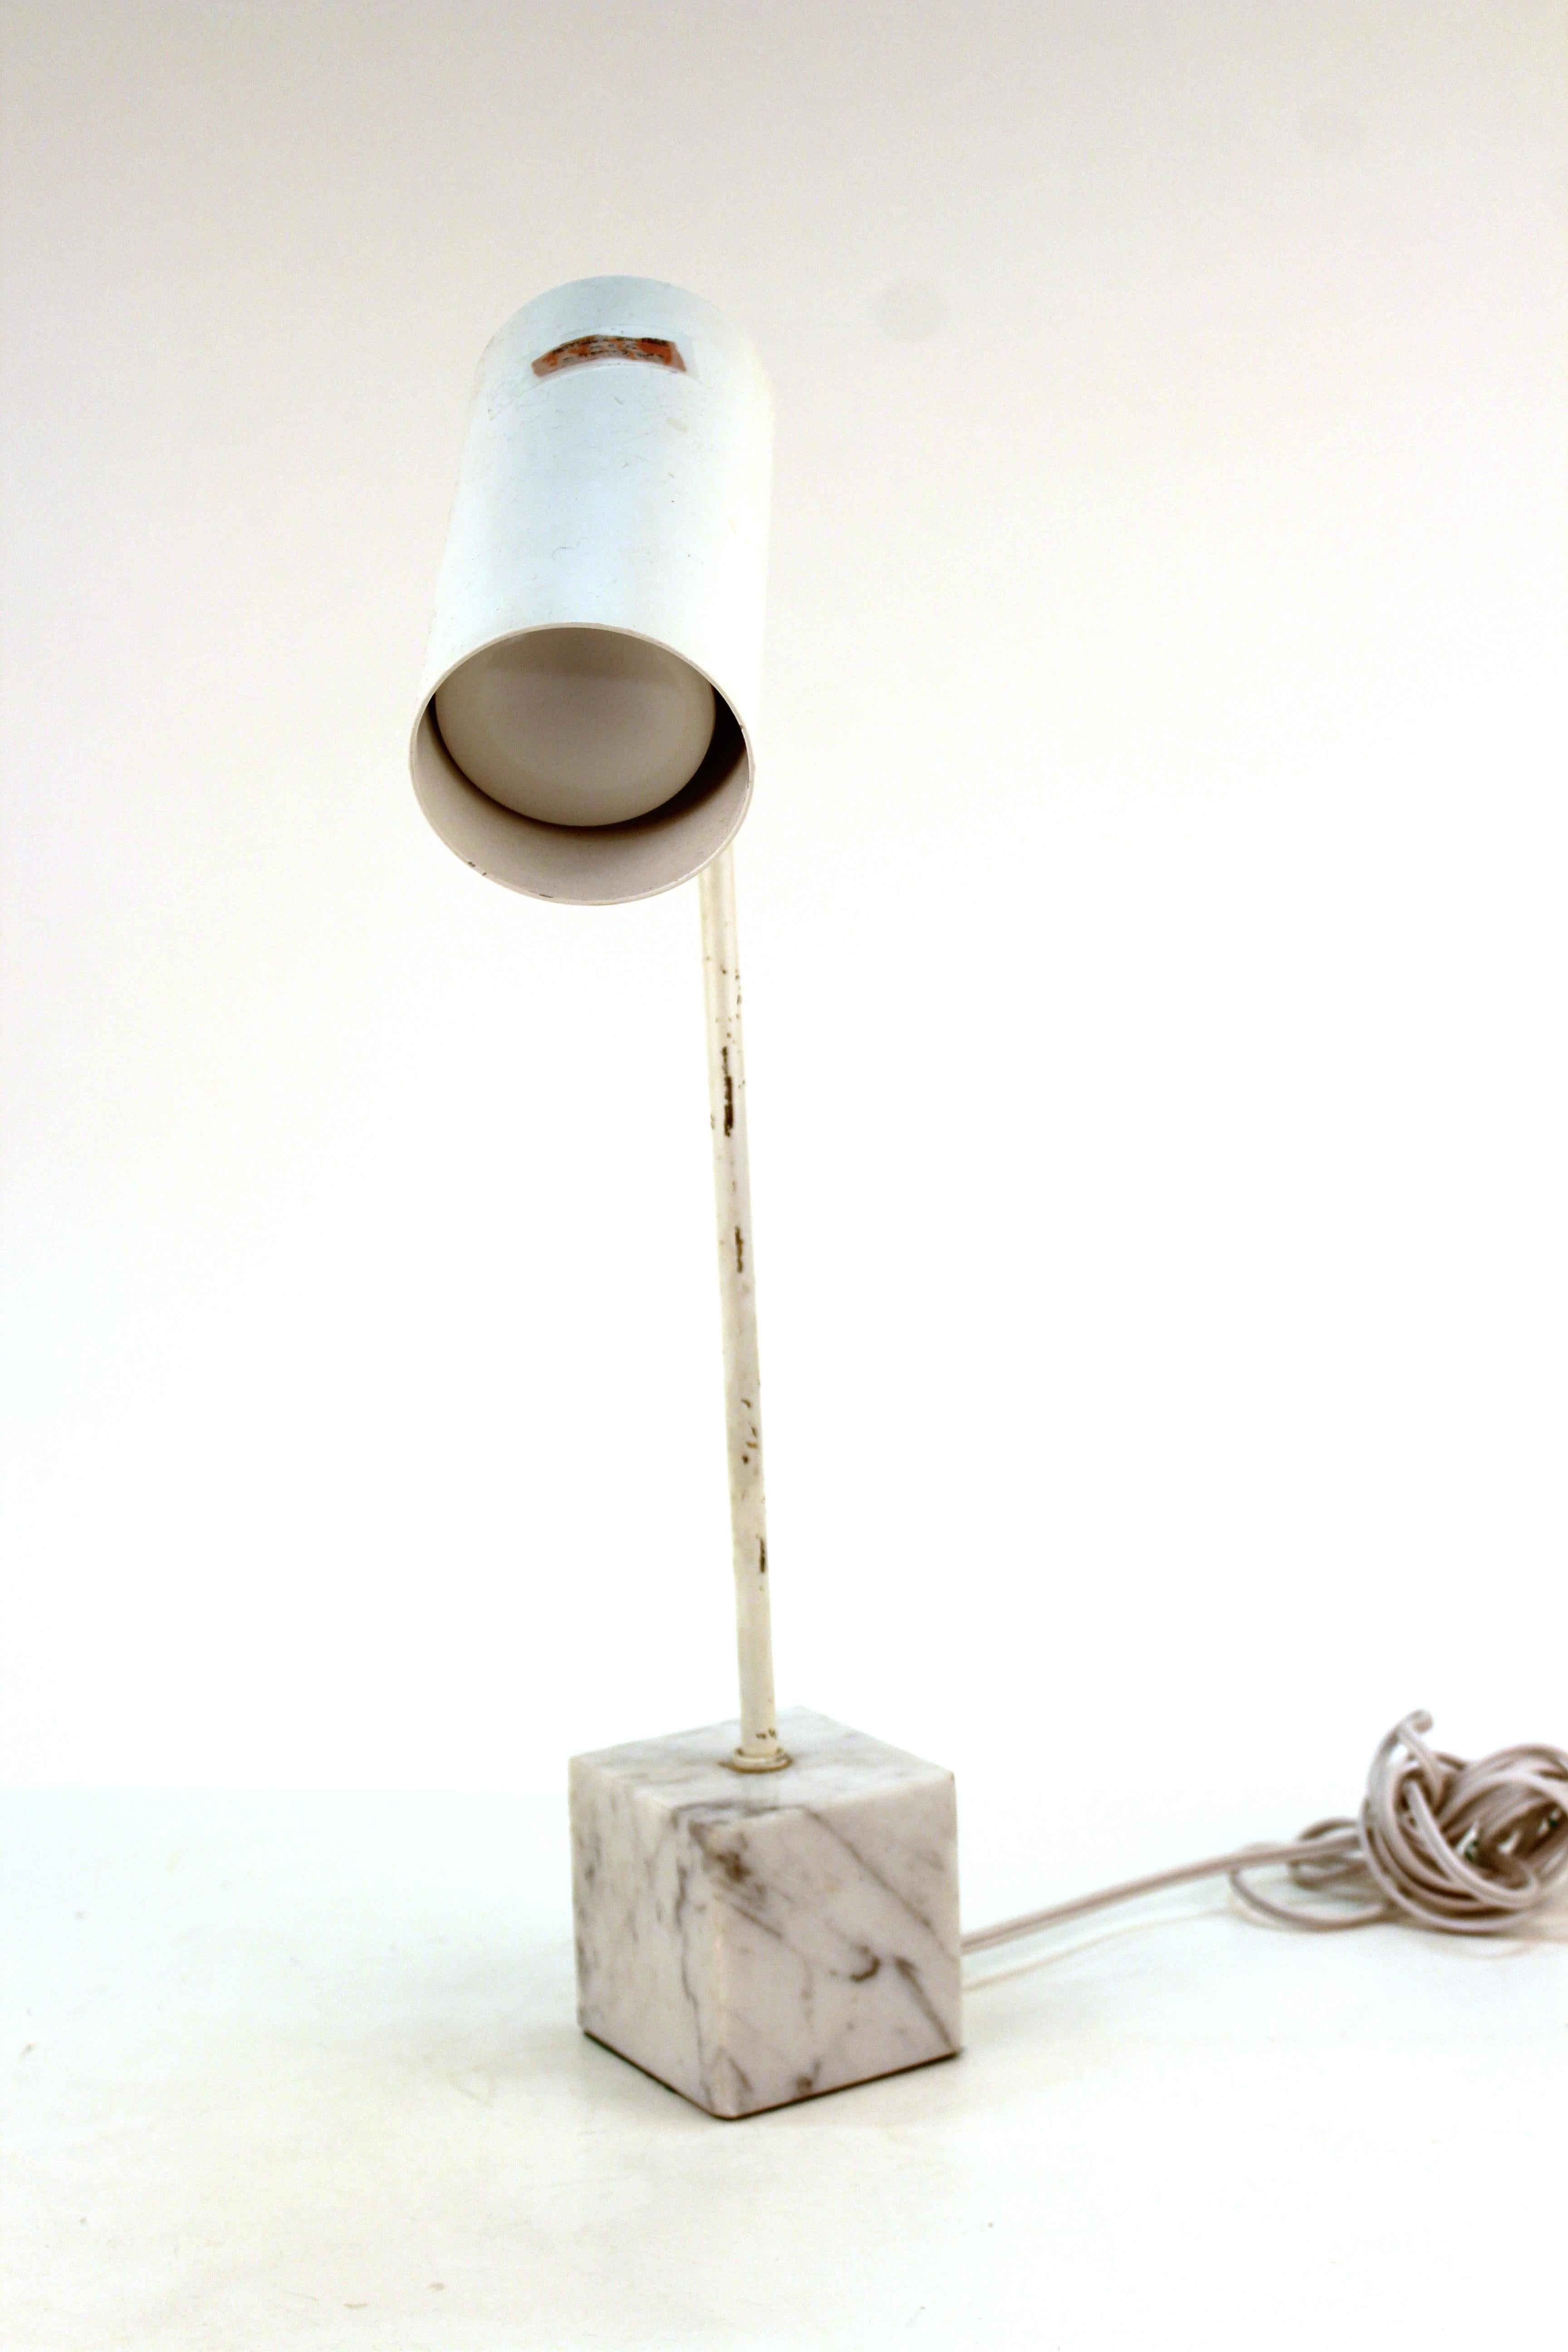 Robert Sonneman for Kovacs Mid-Century Modern cream painted table lamp with a movable can, atop a white and grey marble bloc. The piece has some scratches to the metal finish but is in overall great vintage condition.